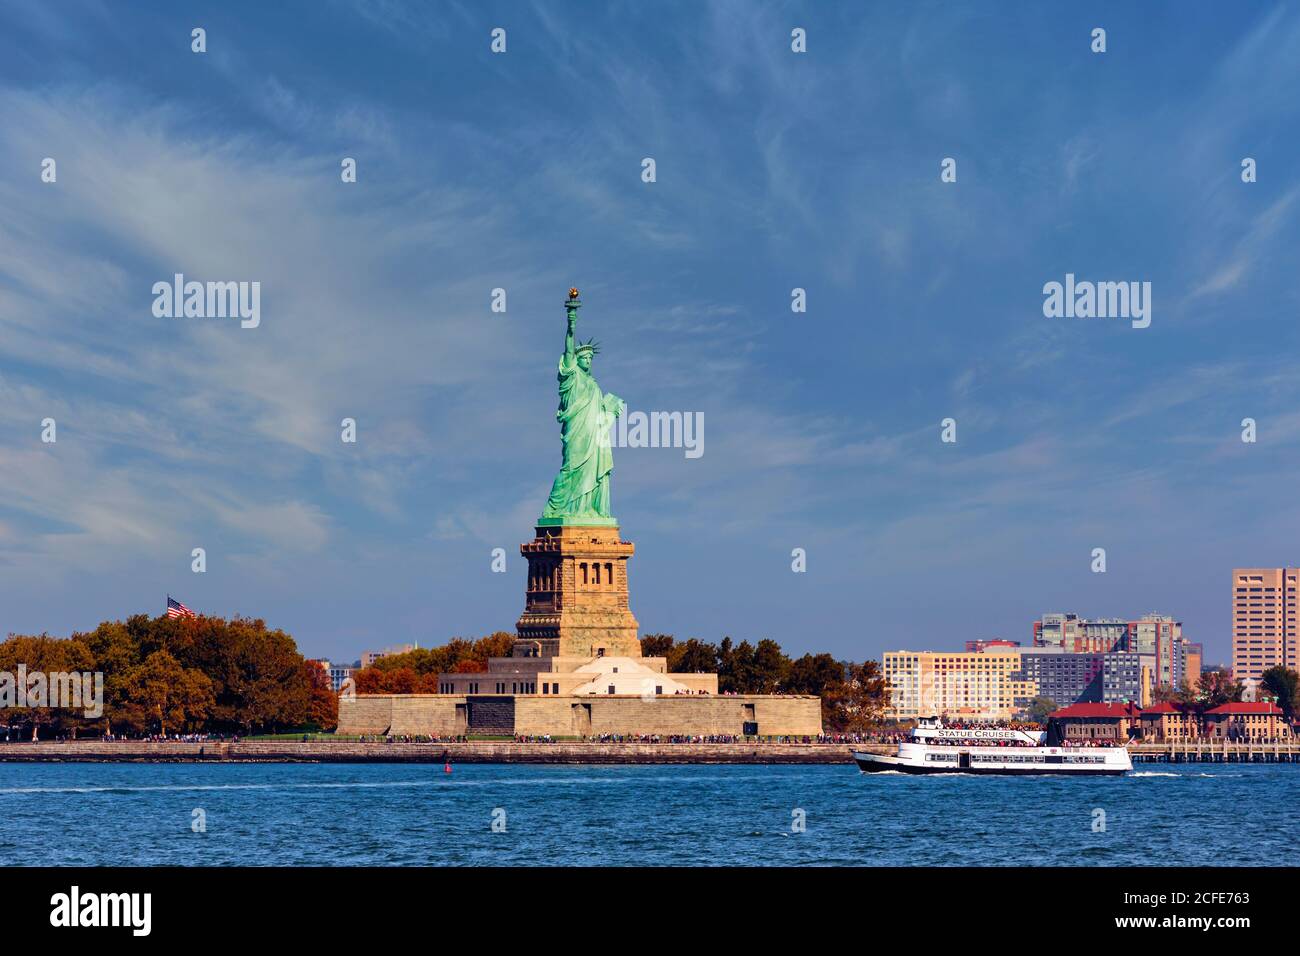 New York, New York State, United States of America.  The Statue of Liberty on Liberty Island in New York Harbor. Stock Photo